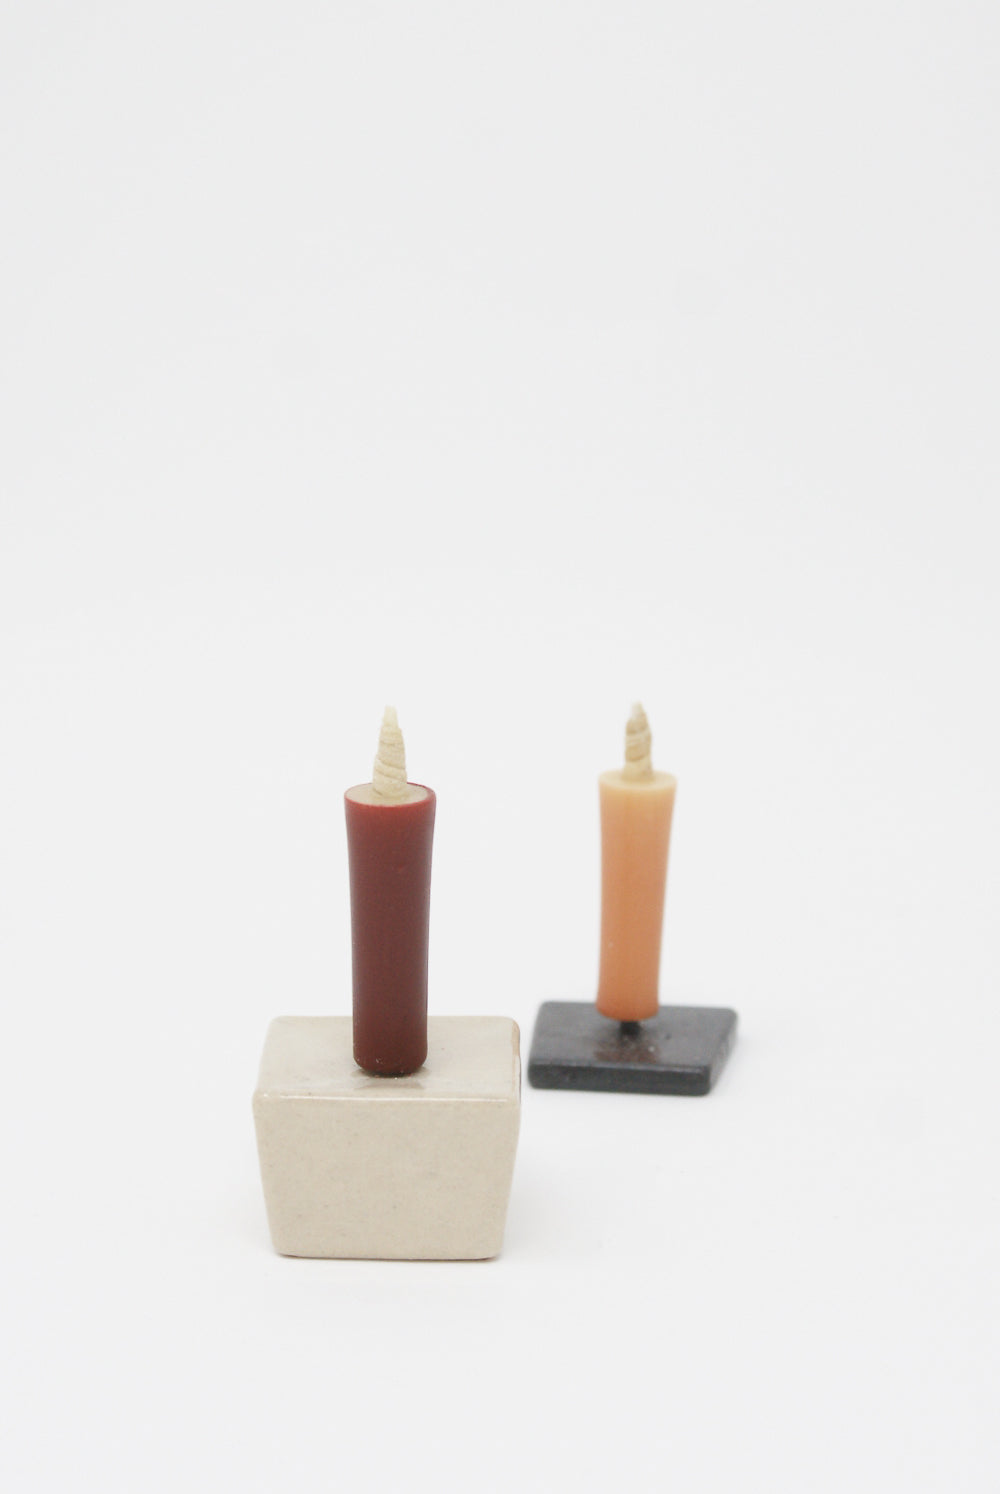 Daiyo - Iron Candle Stand shown with Cubic Ceramic Candle stand and candles